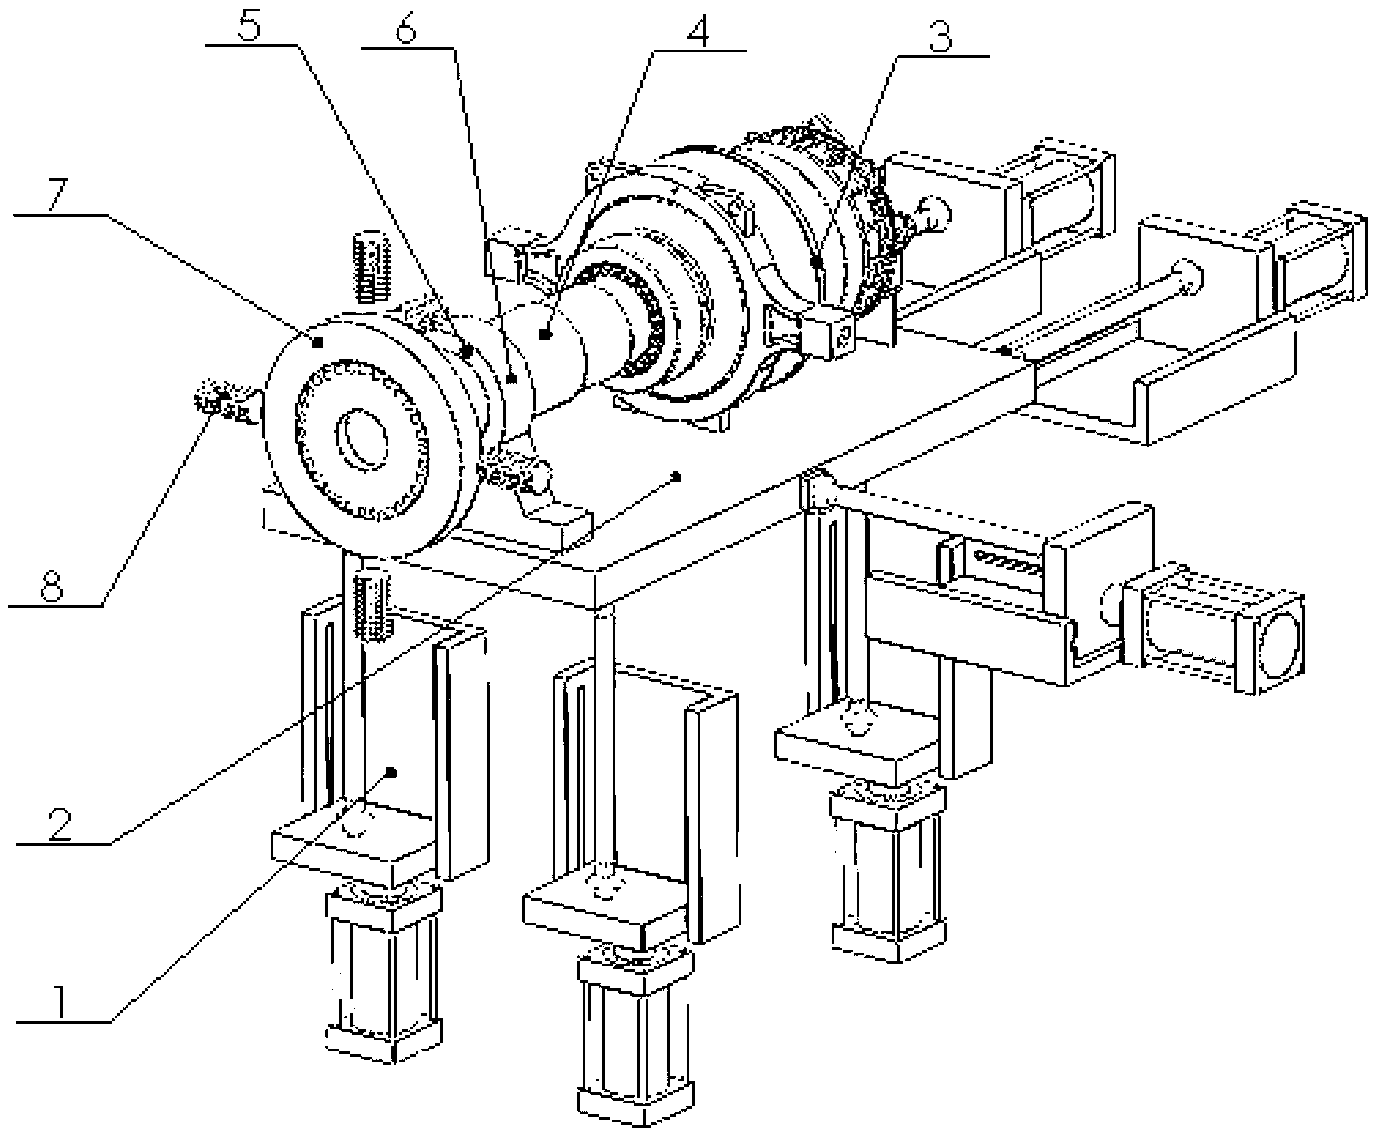 Fan speed-increasing gearbox test bed capable of achieving pose controlling and spindle loading